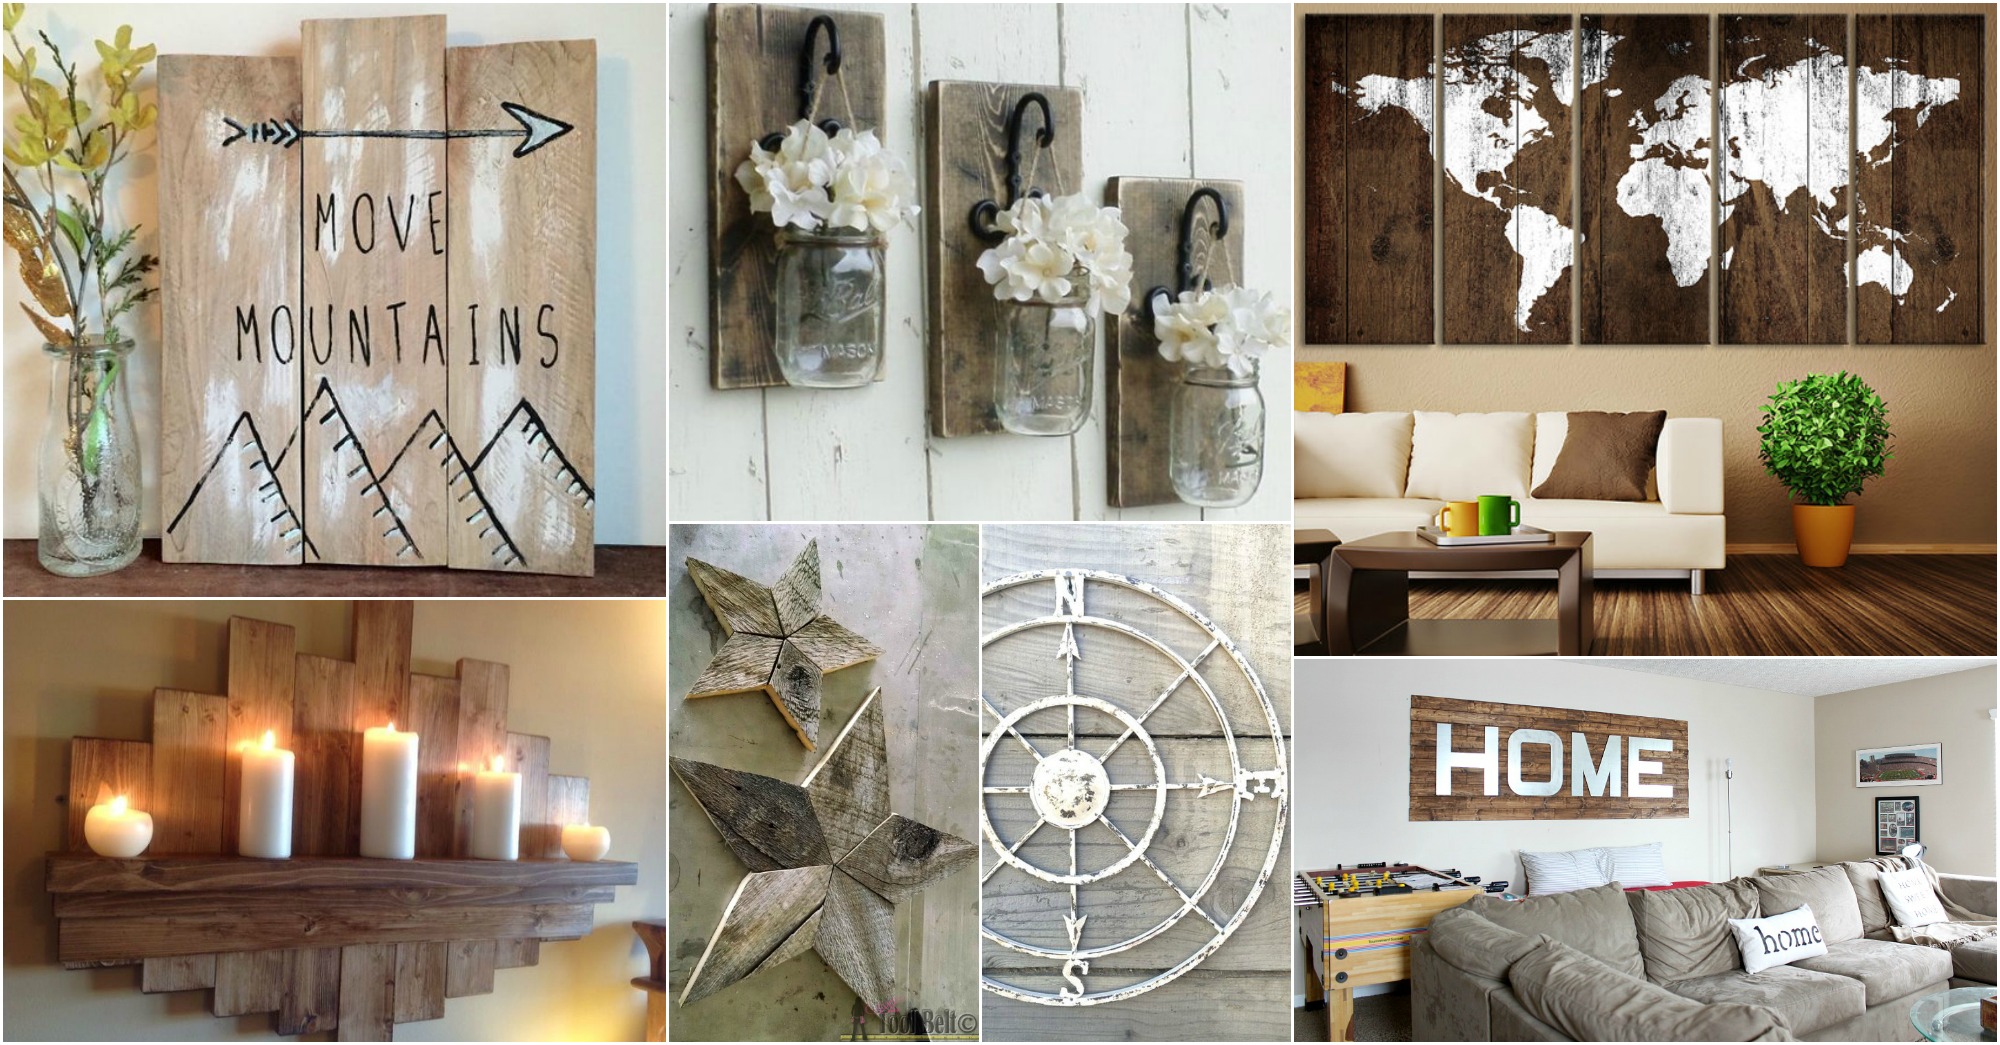 DIY Home Decor Wall Art: Create A Personalized Space With Your Own Artwork